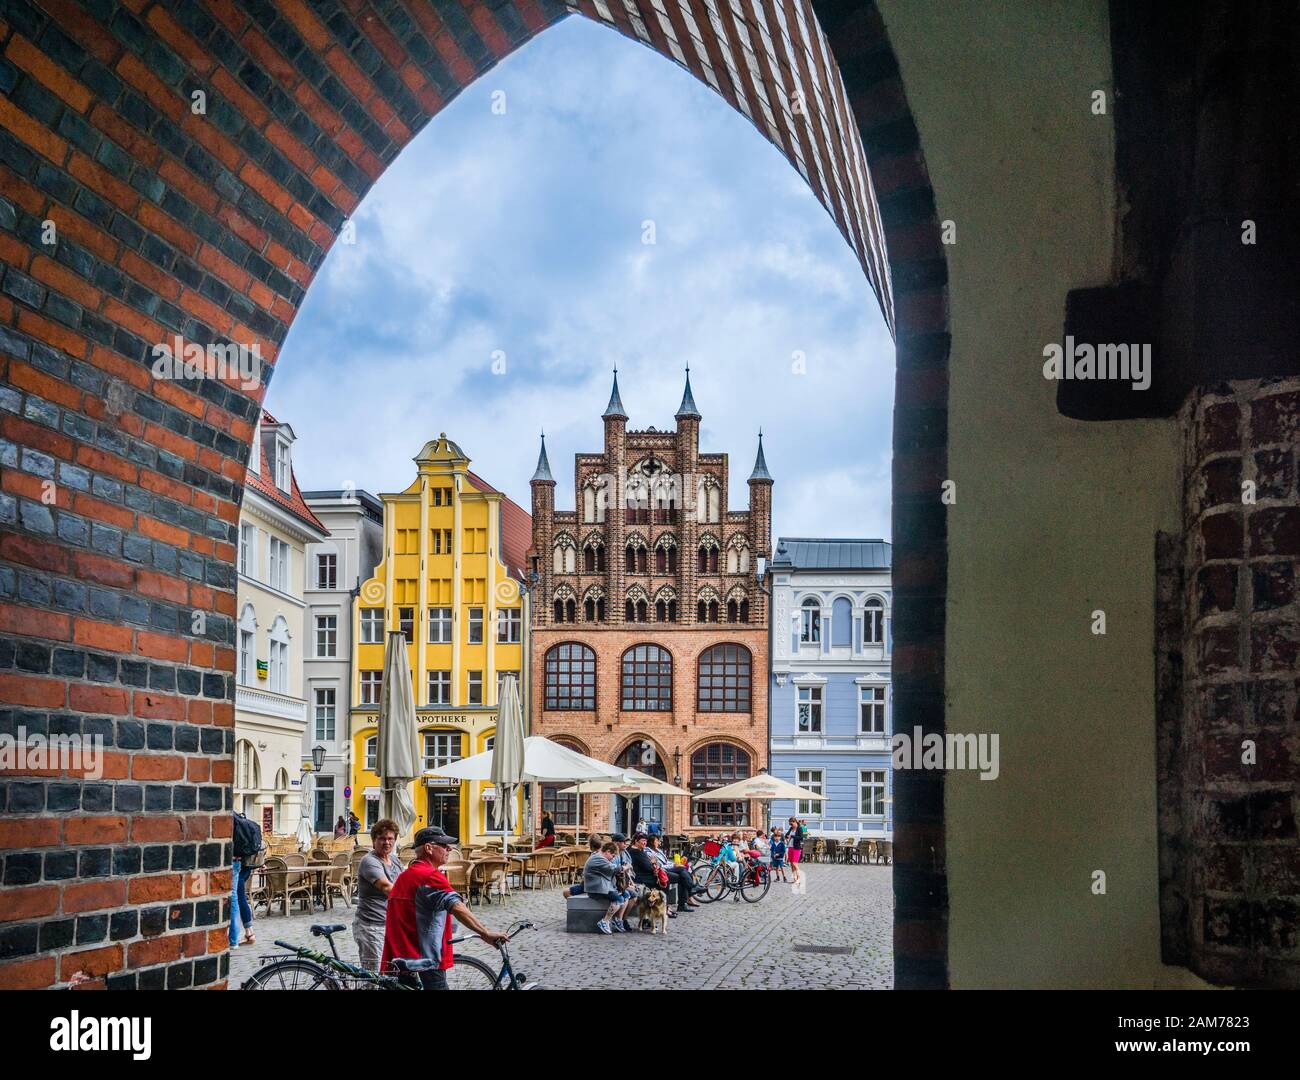 14th-century Gothic Wulflamhaus at the Old Market Square of the Haseatic town of Stralsund, seen through the Butter Passage of Stralsund town hall, Me Stock Photo